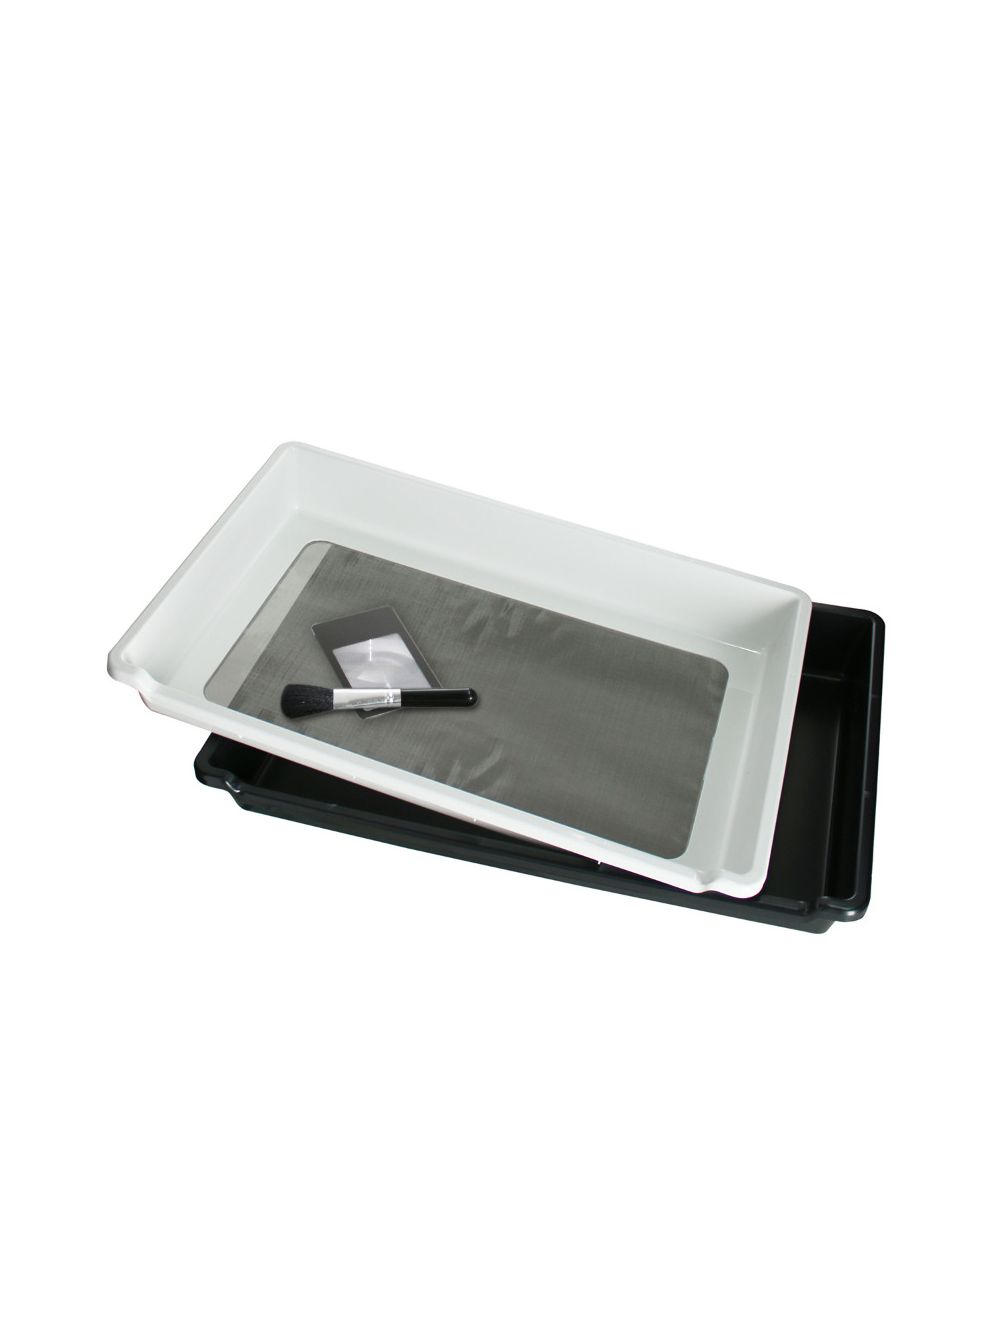 Heisenberg Trimtray SET with Trimtray, Magnifier and Brush